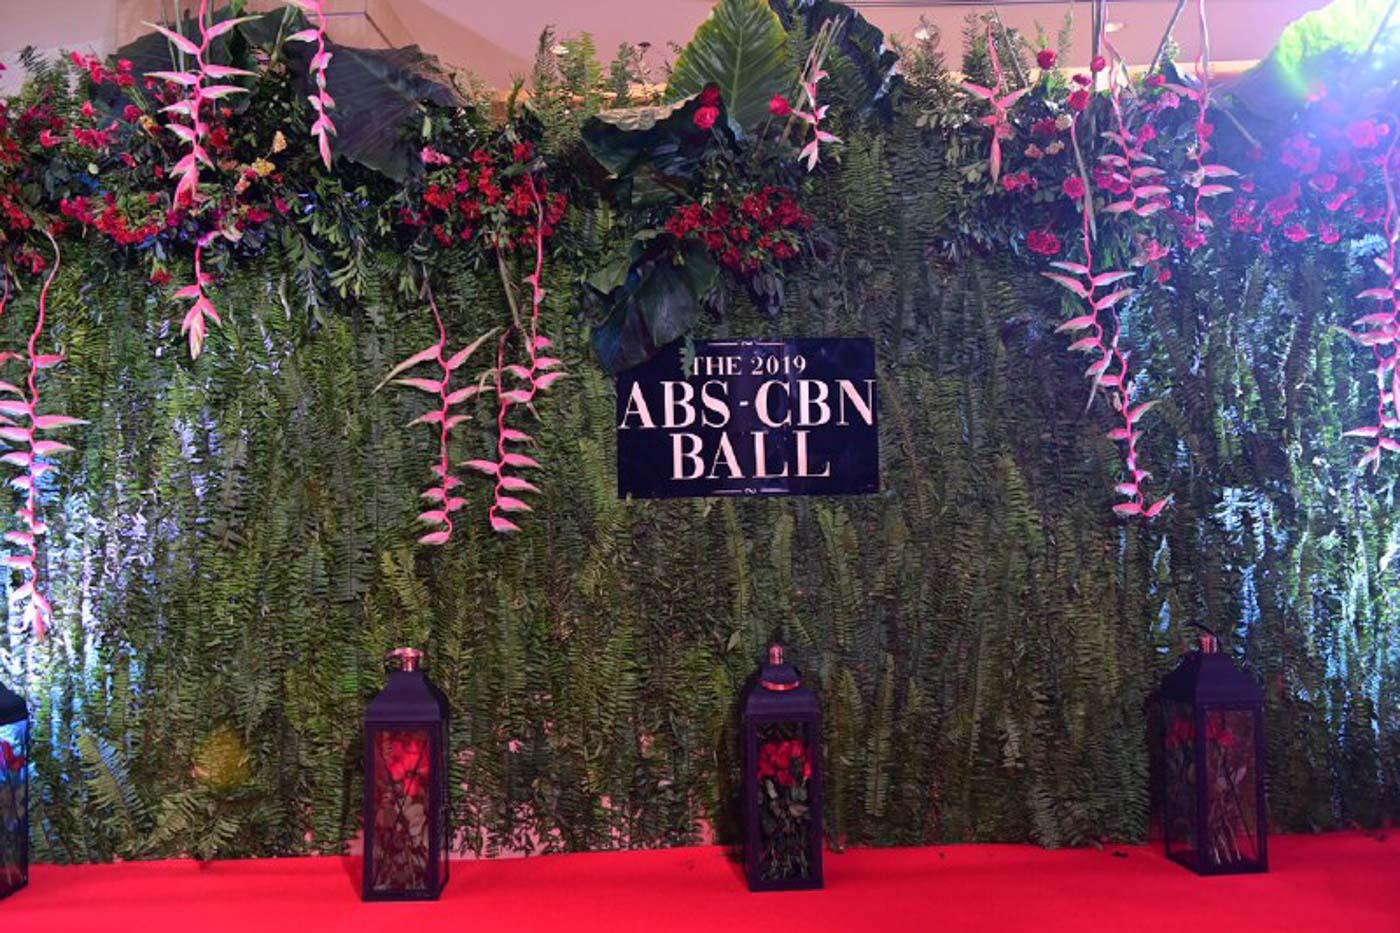 All the looks at the ABS-CBN Ball 2019